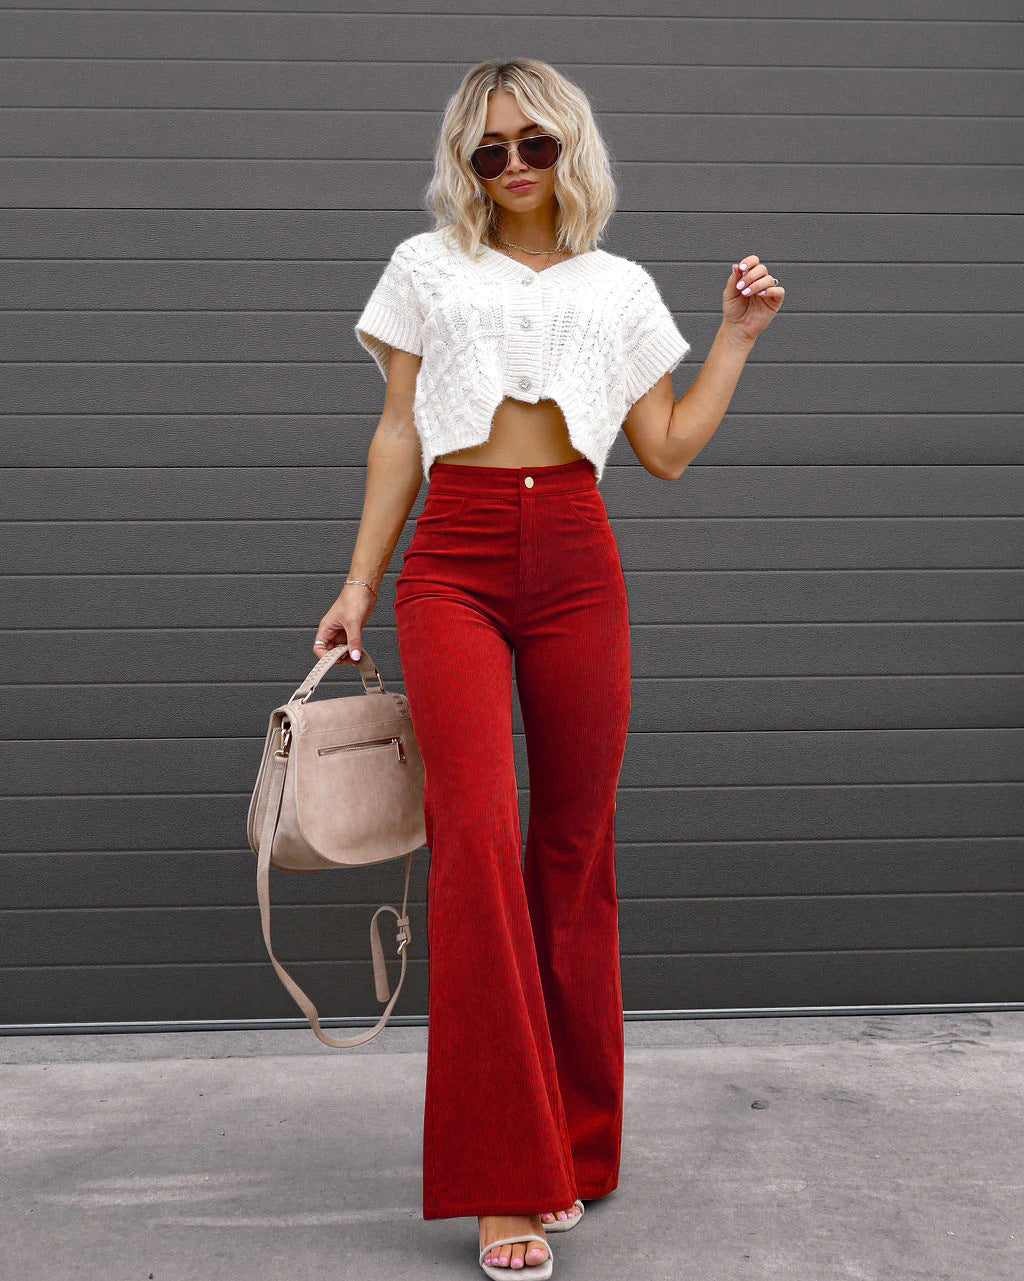 Pants  | Women Solid Color Corduroy Flared Pants | Wine Red |  L| thecurvestory.myshopify.com